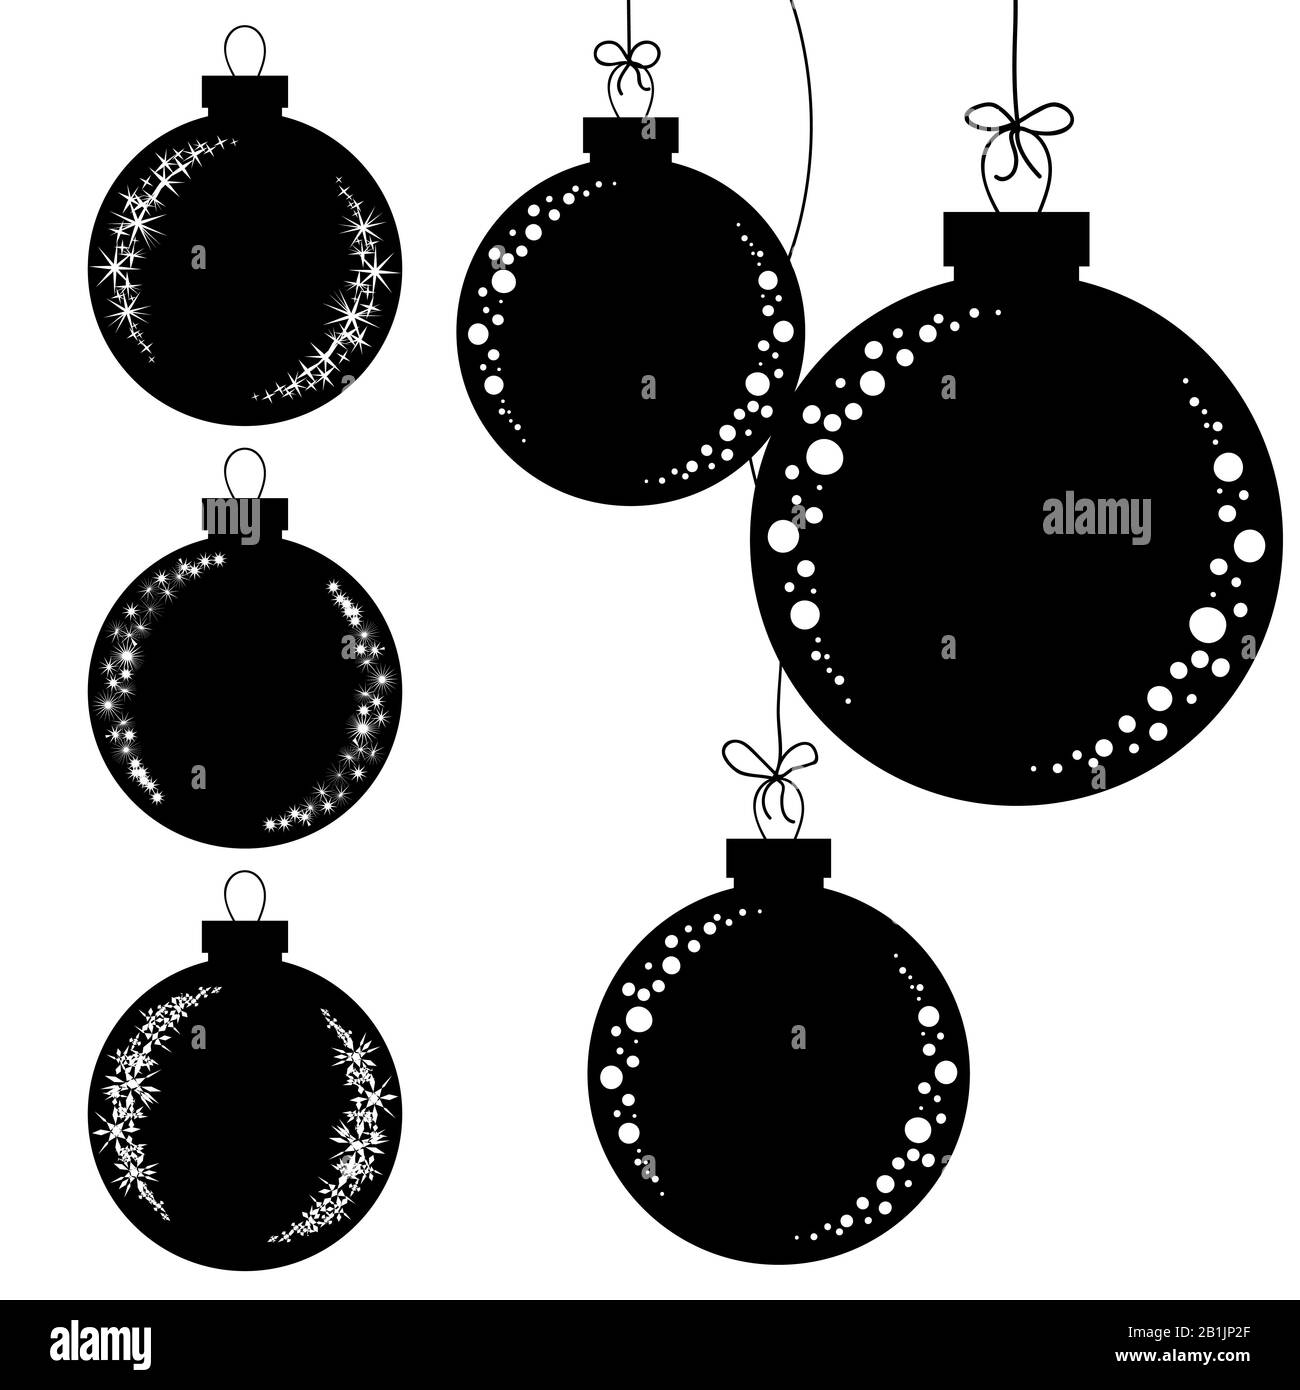 Christmas bauble white background Black and White Stock Photos & Images ...